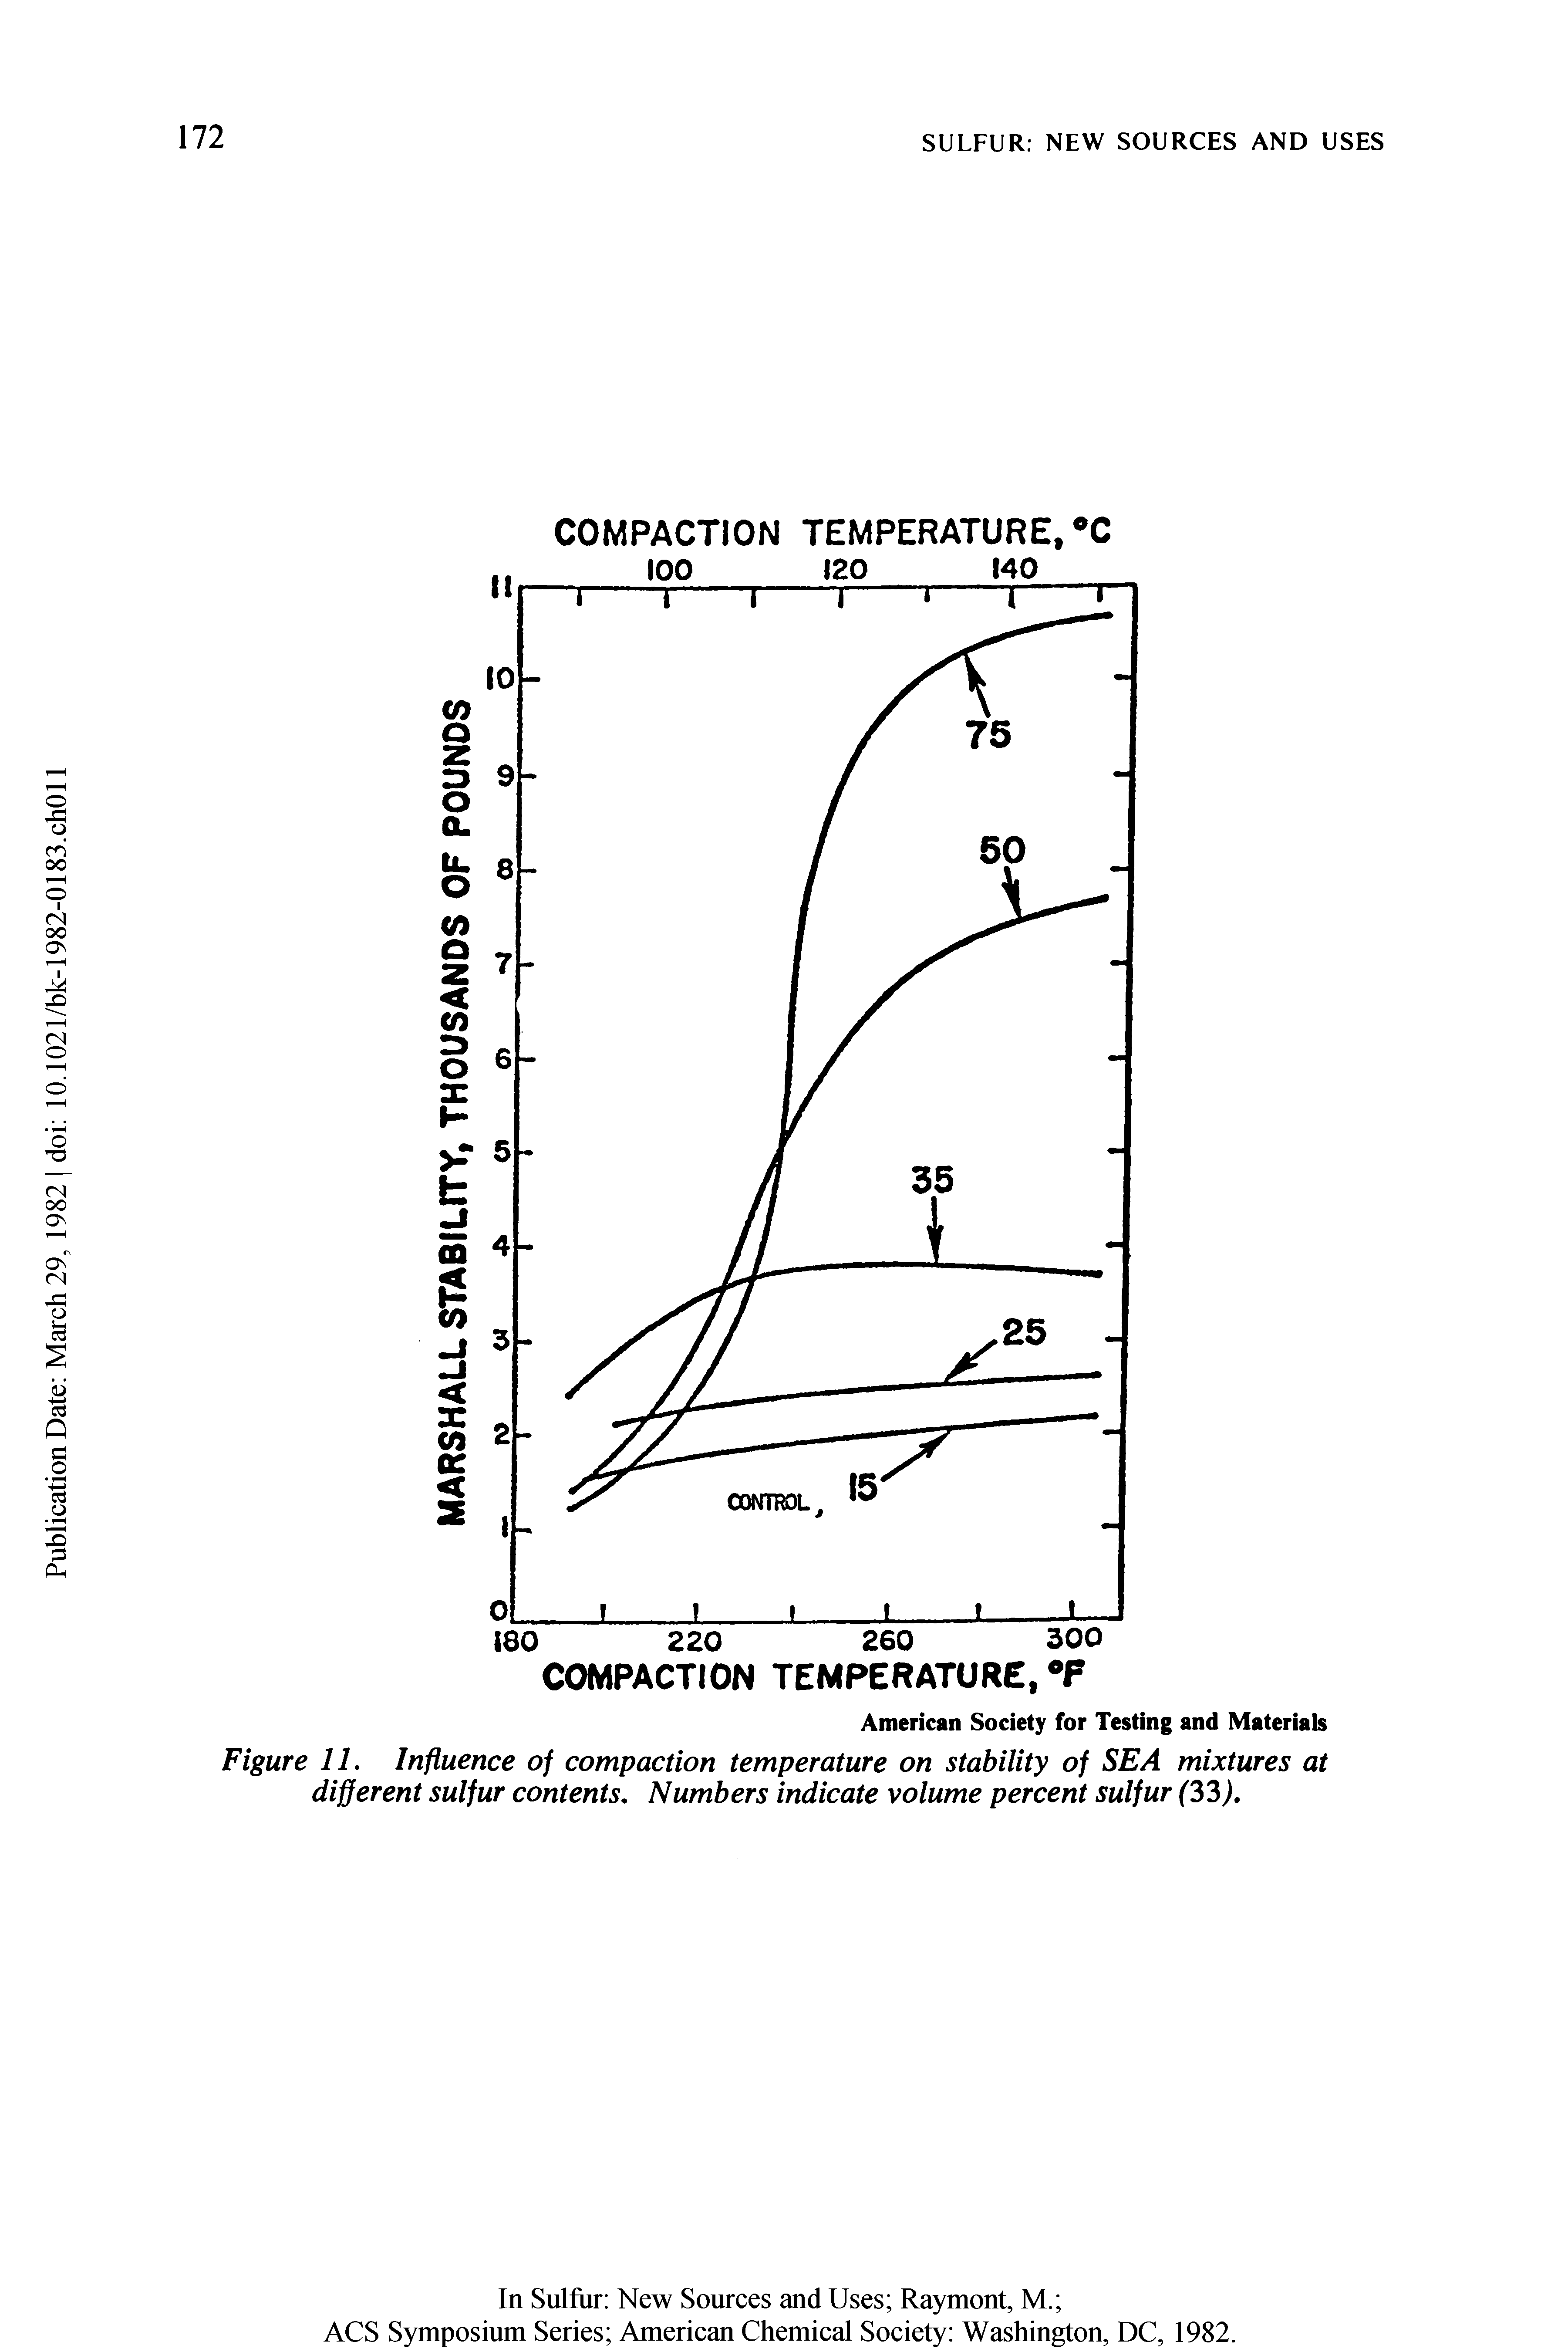 Figure 11. Influence of compaction temperature on stability of SEA mixtures at different sulfur contents. Numbers indicate volume percent sulfur ( ).